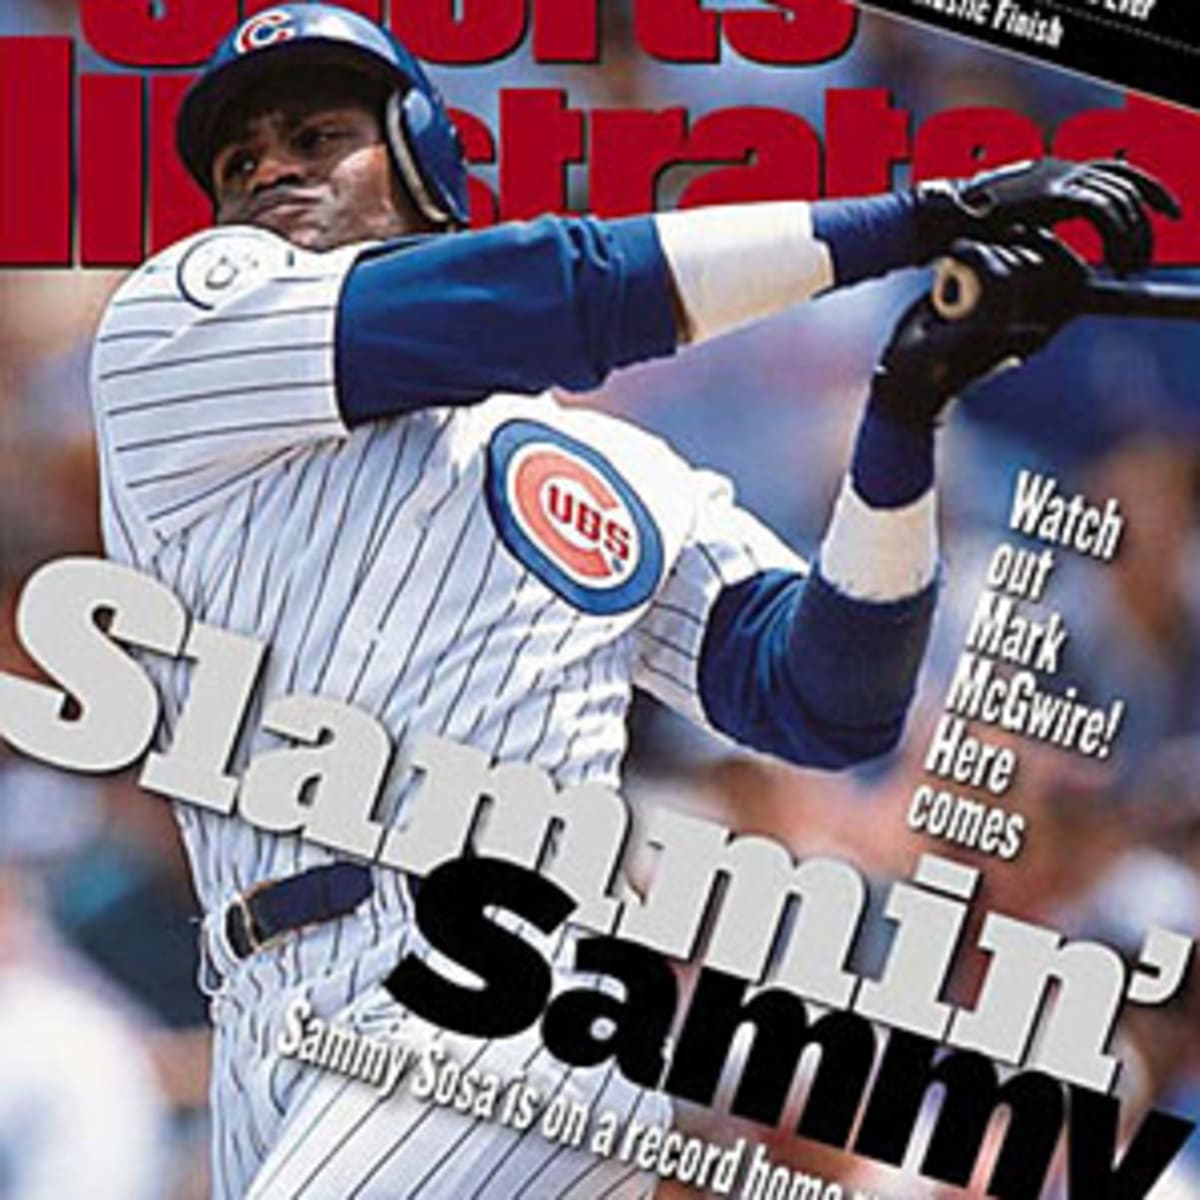 JAWS and the 2014 Hall of Fame ballot: Sammy Sosa - Sports Illustrated